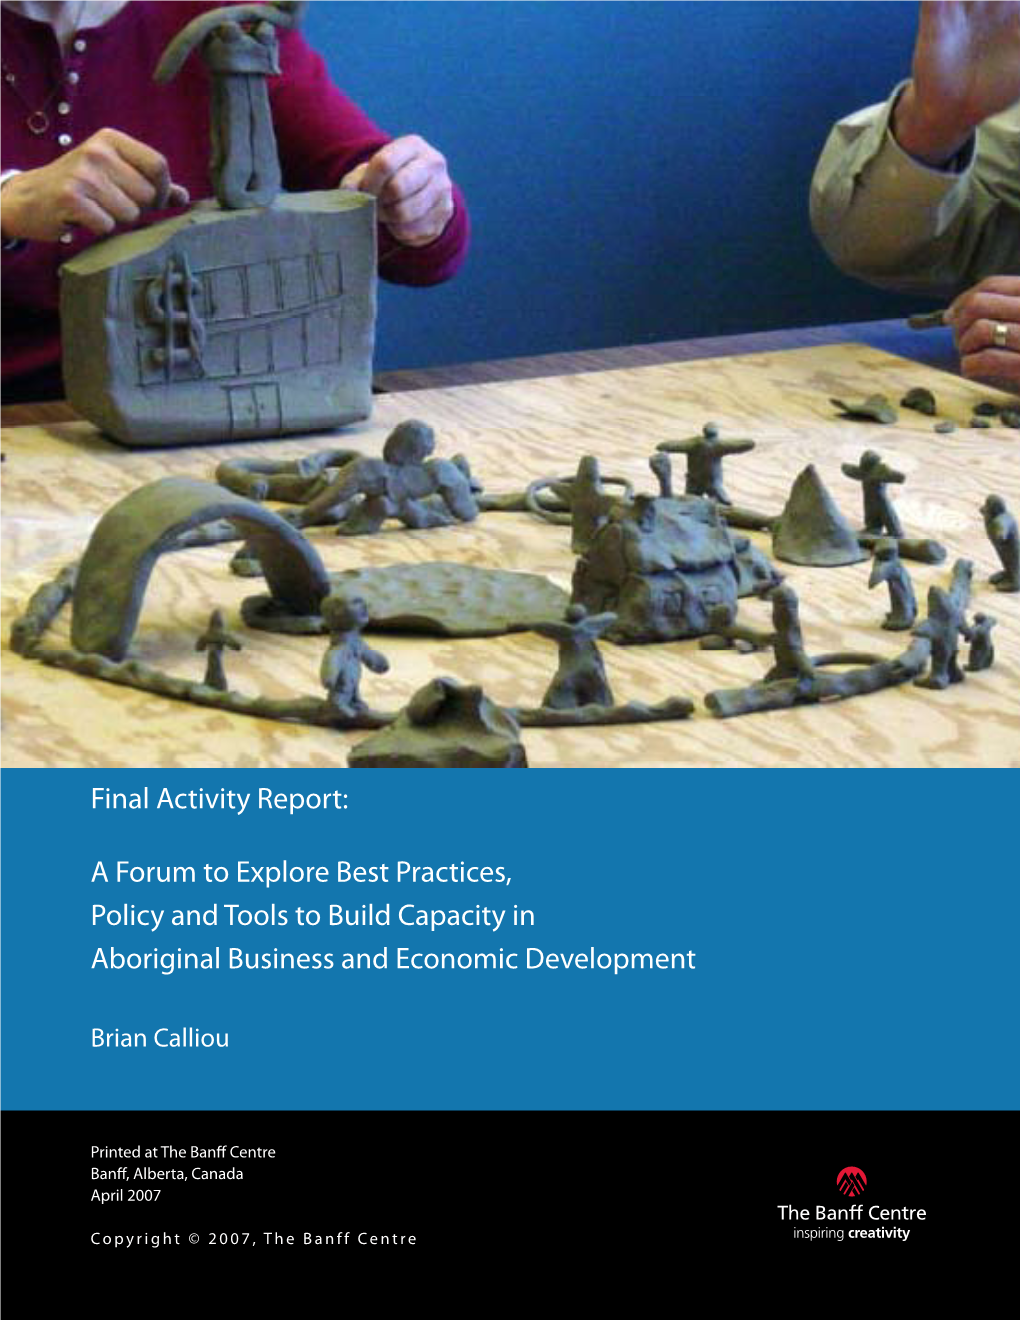 Final Activity Report: a Forum to Explore Best Practices, Policy and Tools to Build Capacity in Aboriginal Business and Economic Development